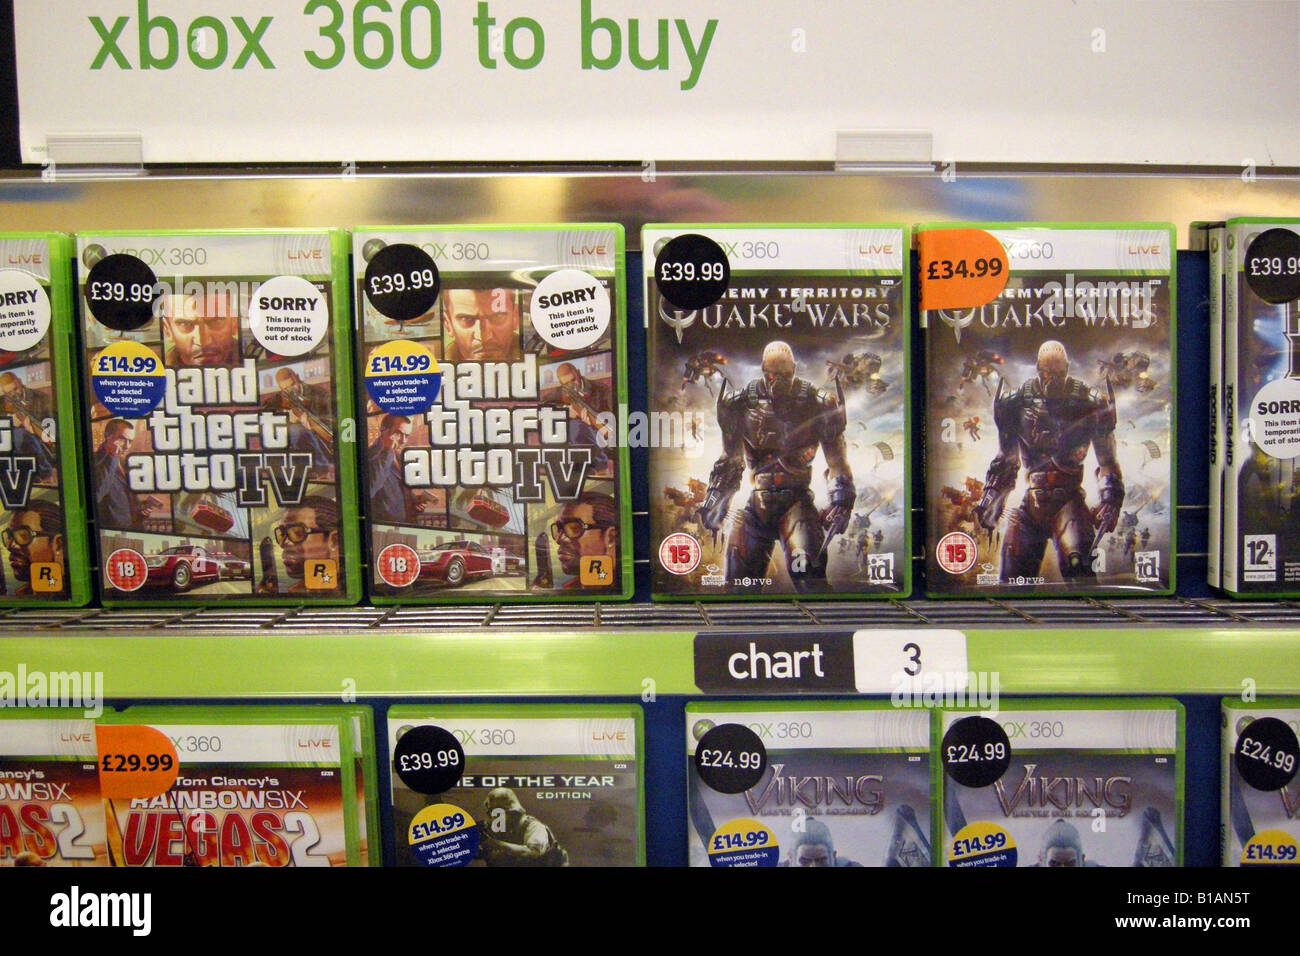 xbox store 360 games